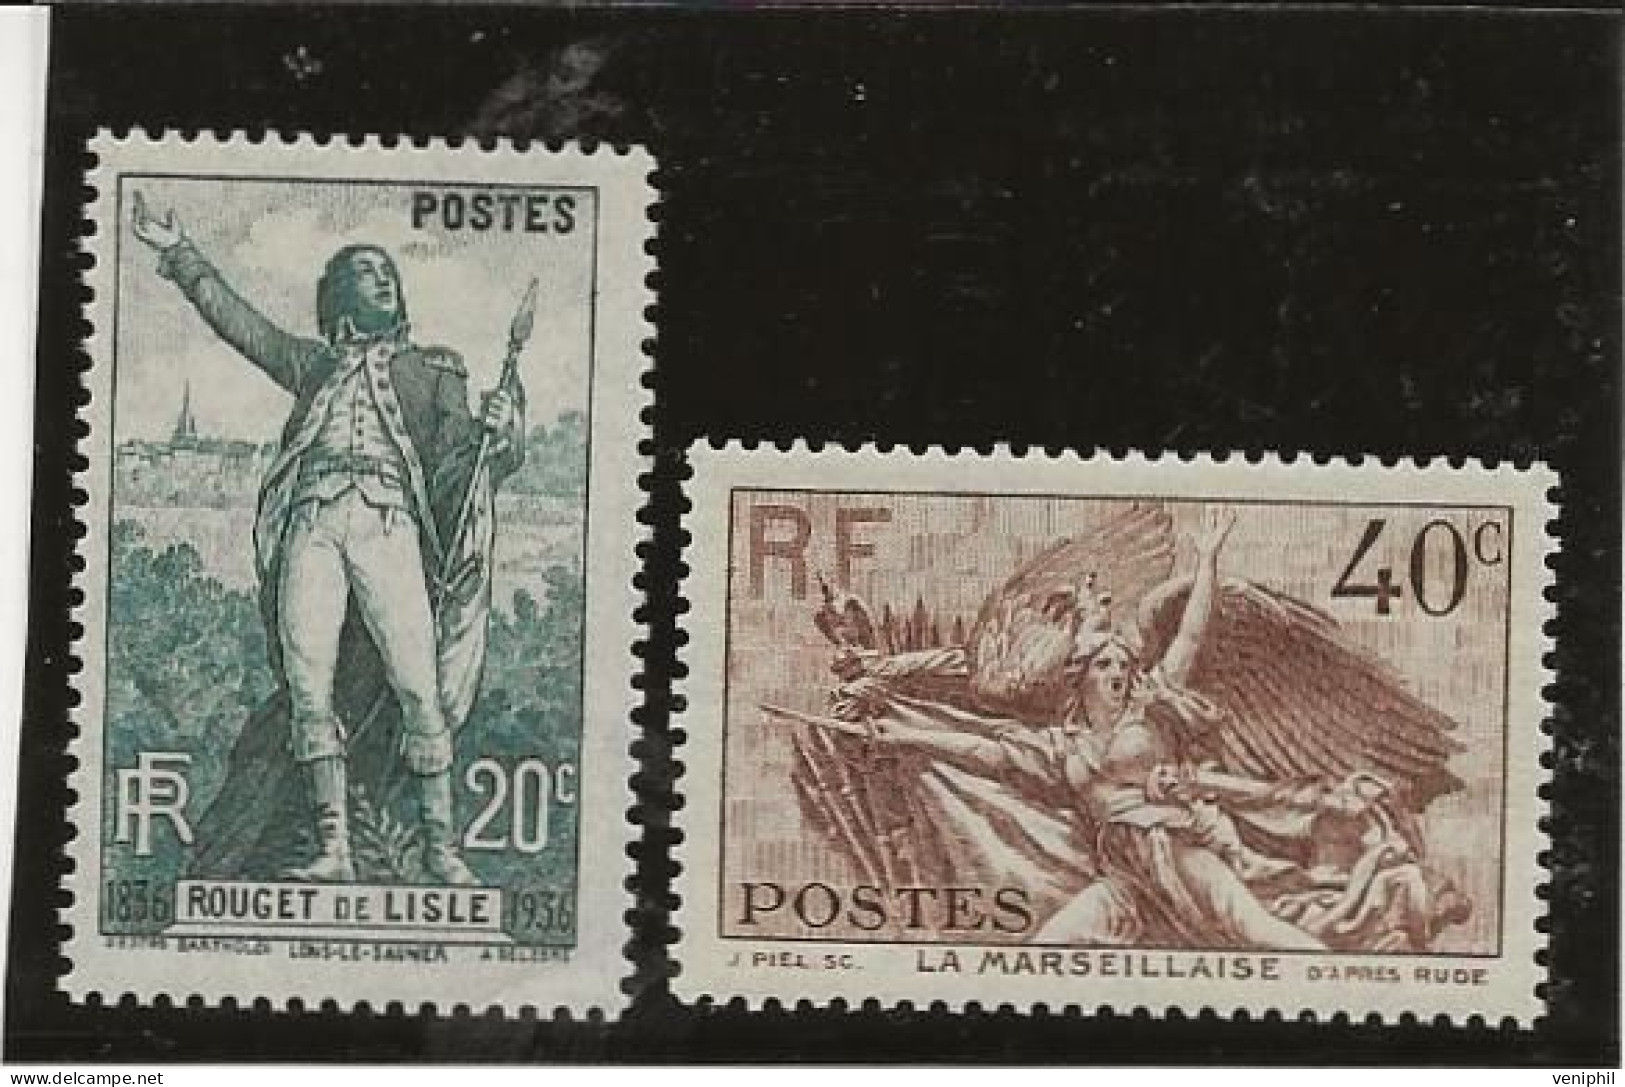 TIMBRES N° 314-315  NEUF SANS CHARNIERE - ANNEE 1936 - COTE : 20 € - Nuovi